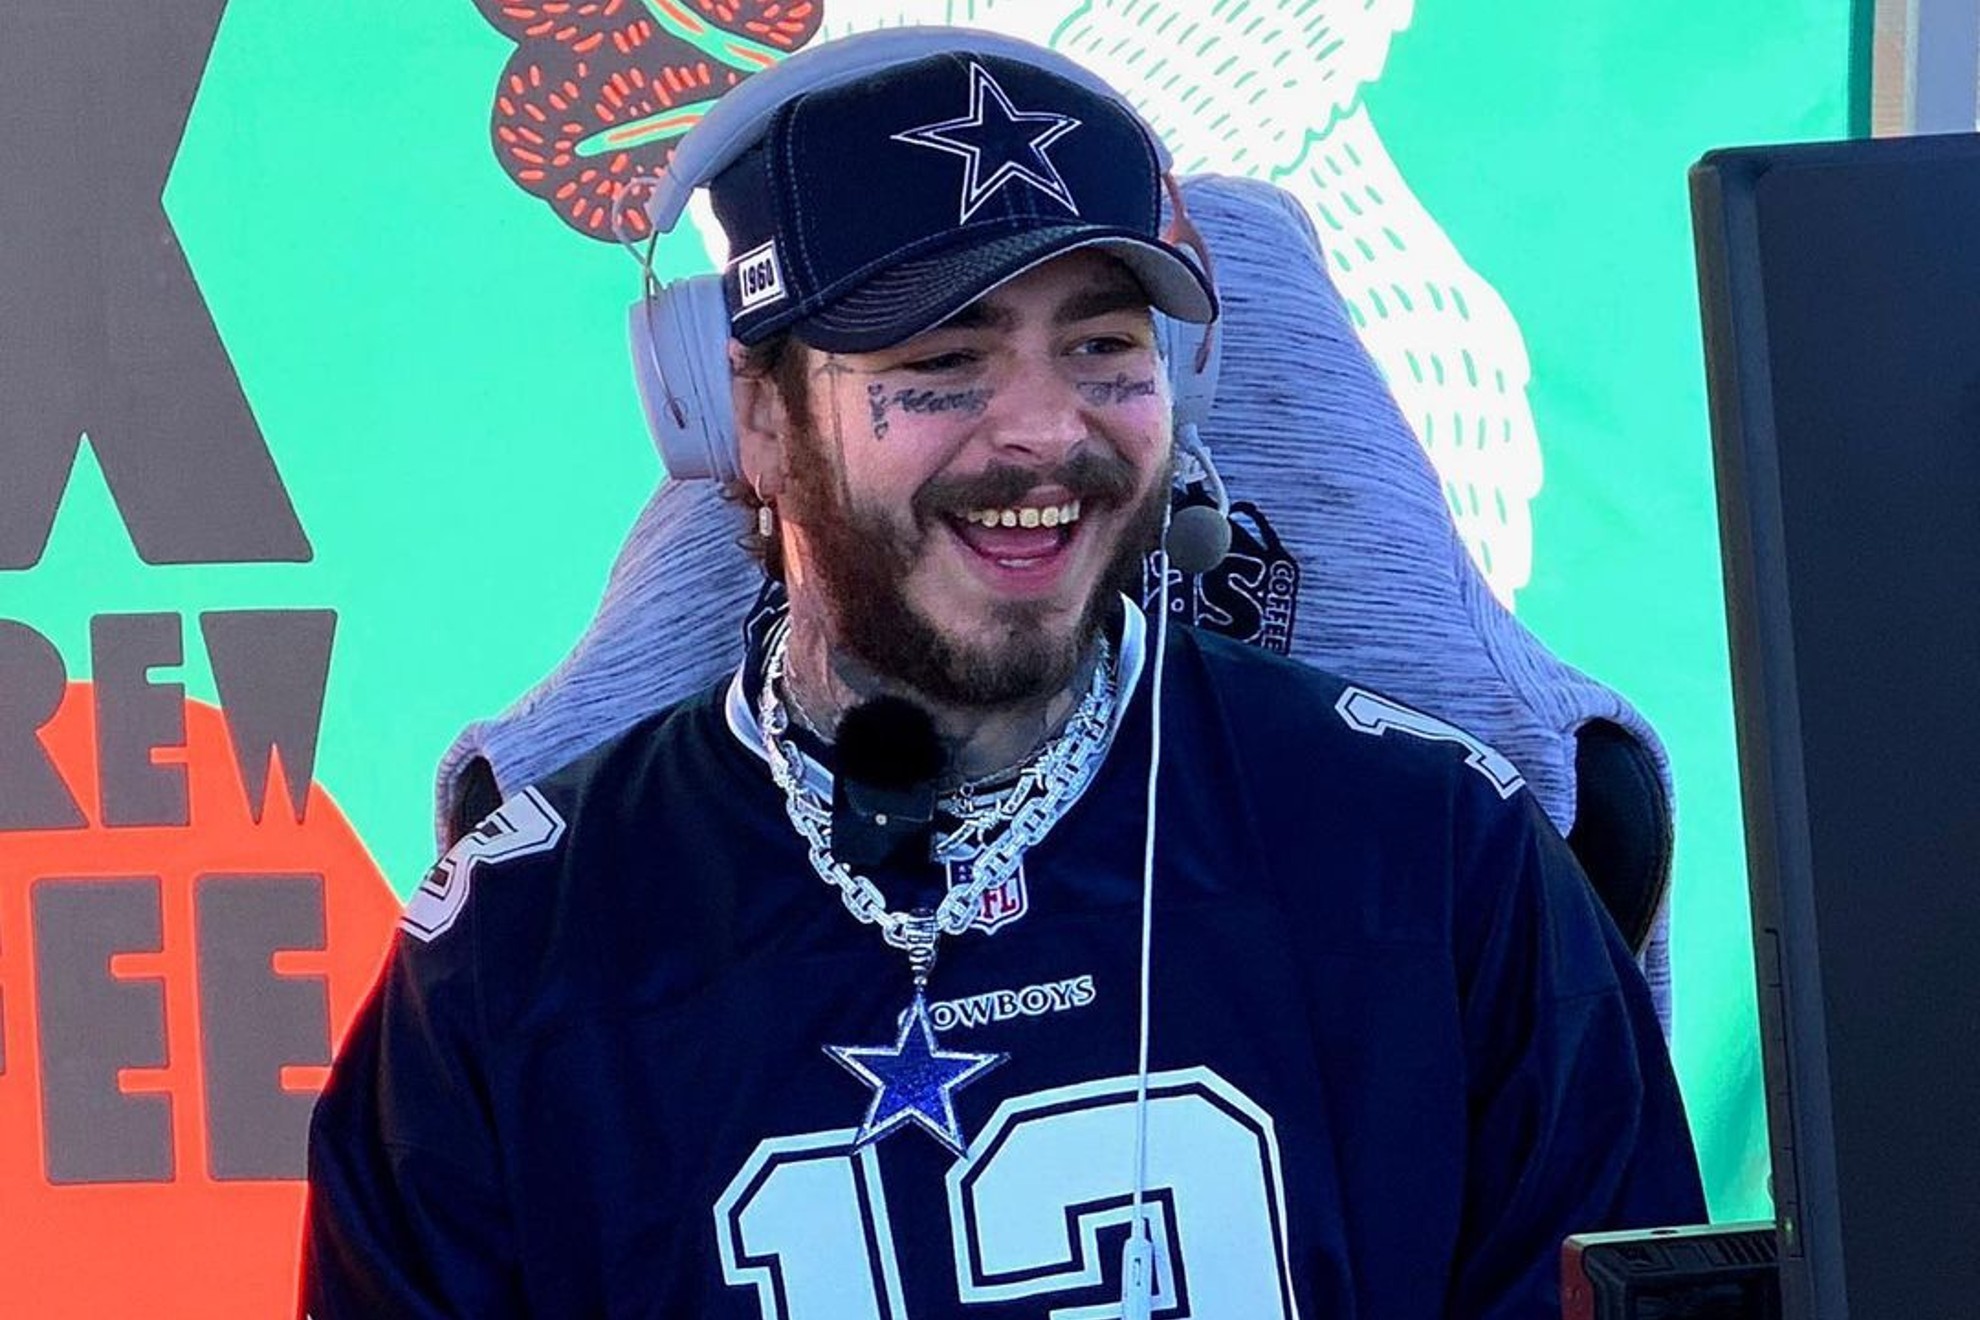 Post Malone vows to get the number '88' tattooed on his forehead if Dallas  Cowboys win Super Bowl